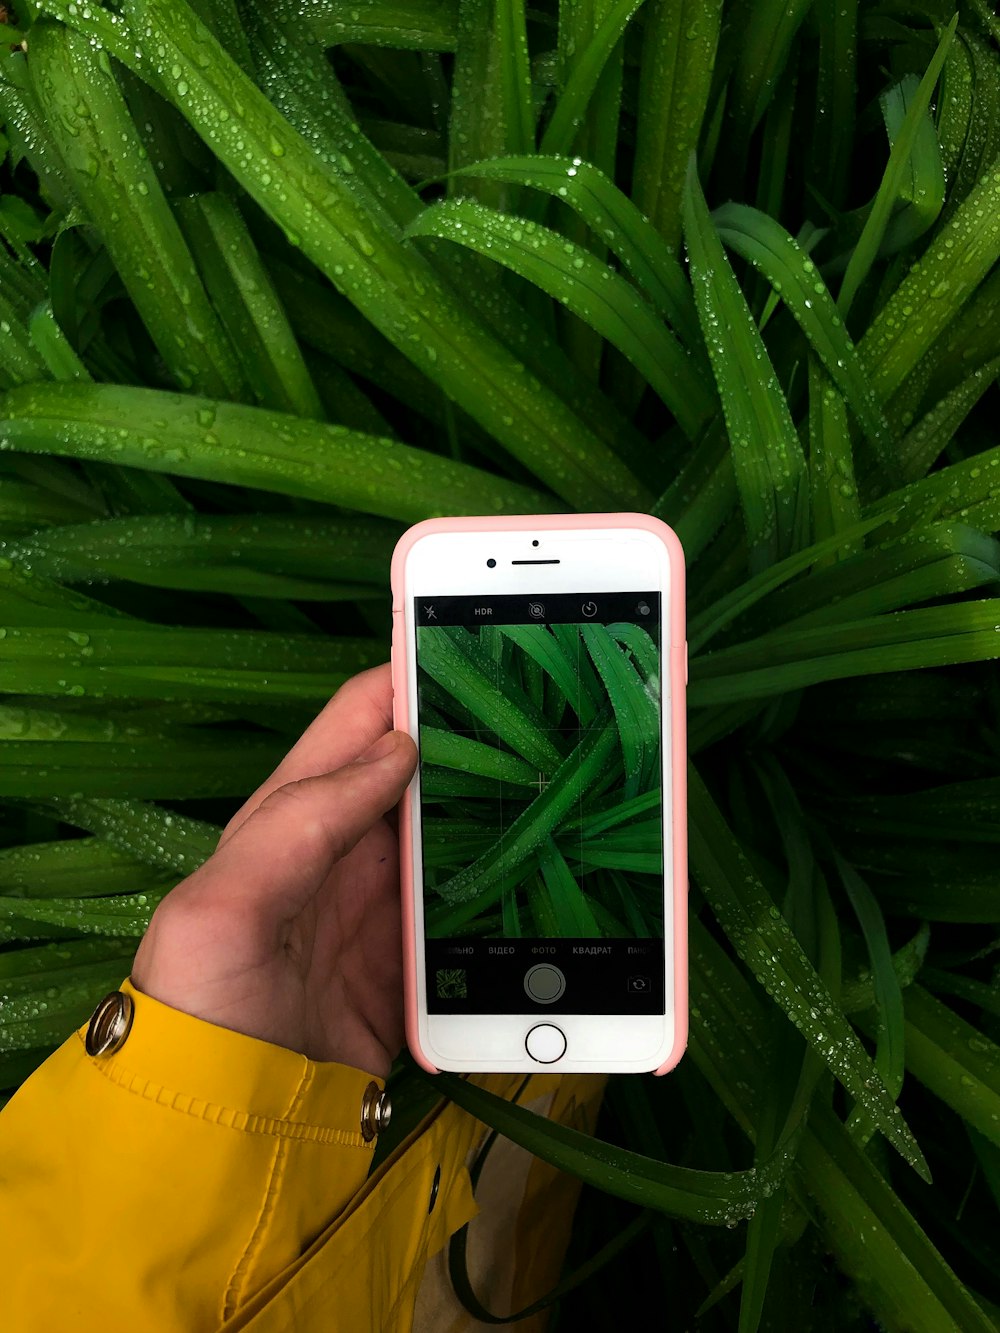 gold iPhone 6 with grass photo